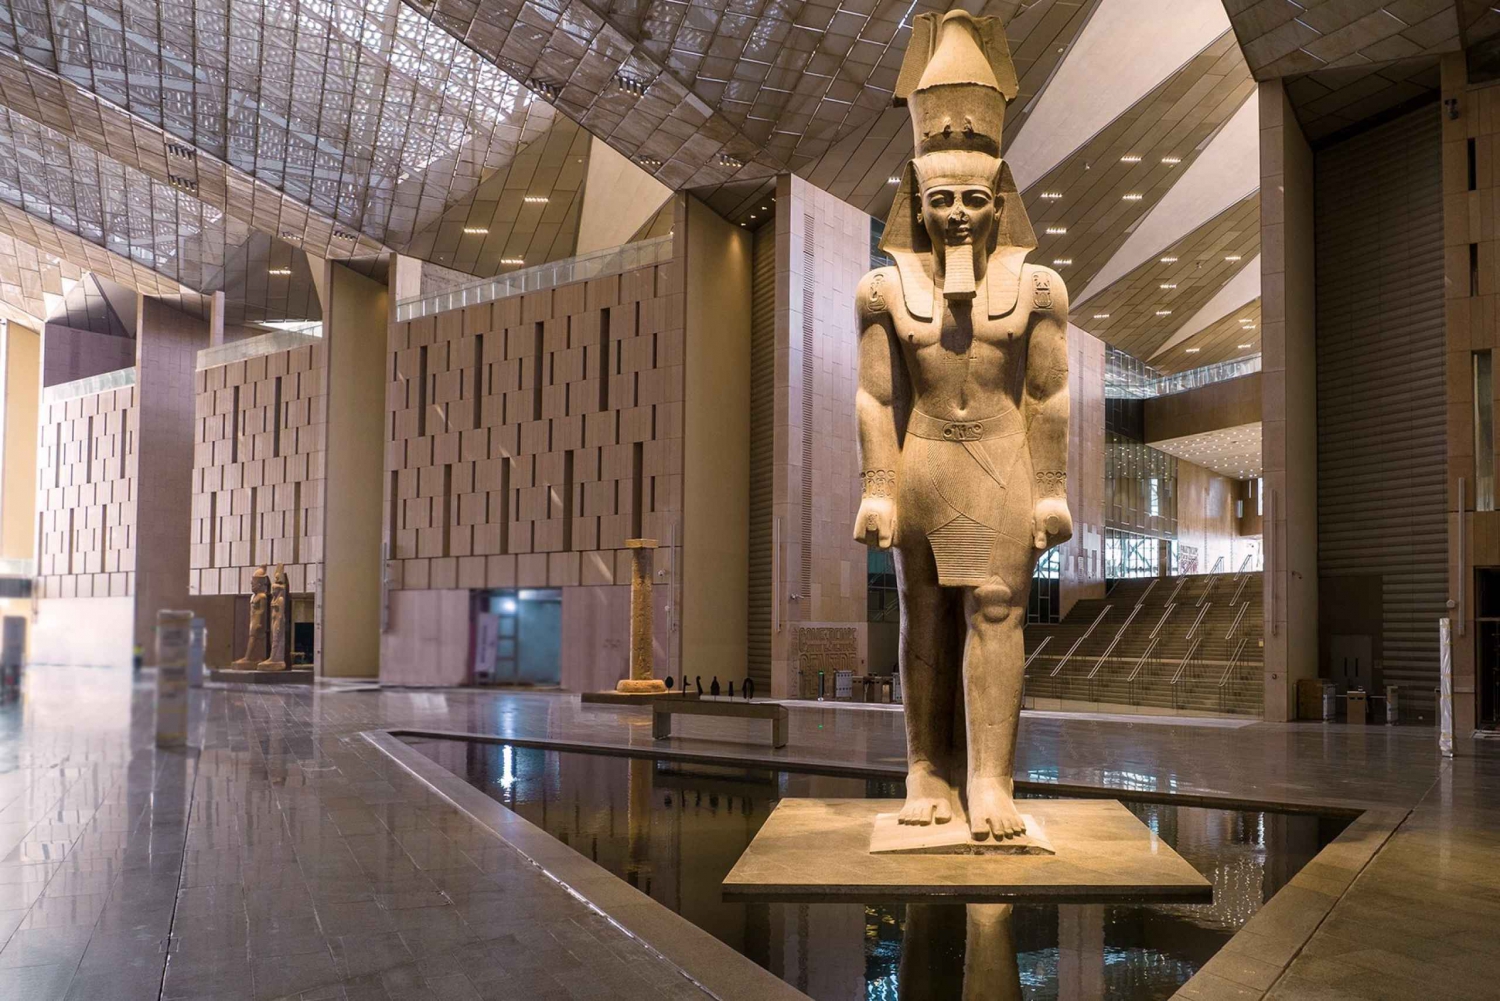 Cairo: Entry Ticket and Guided Tour of Grand Egyptian Museum